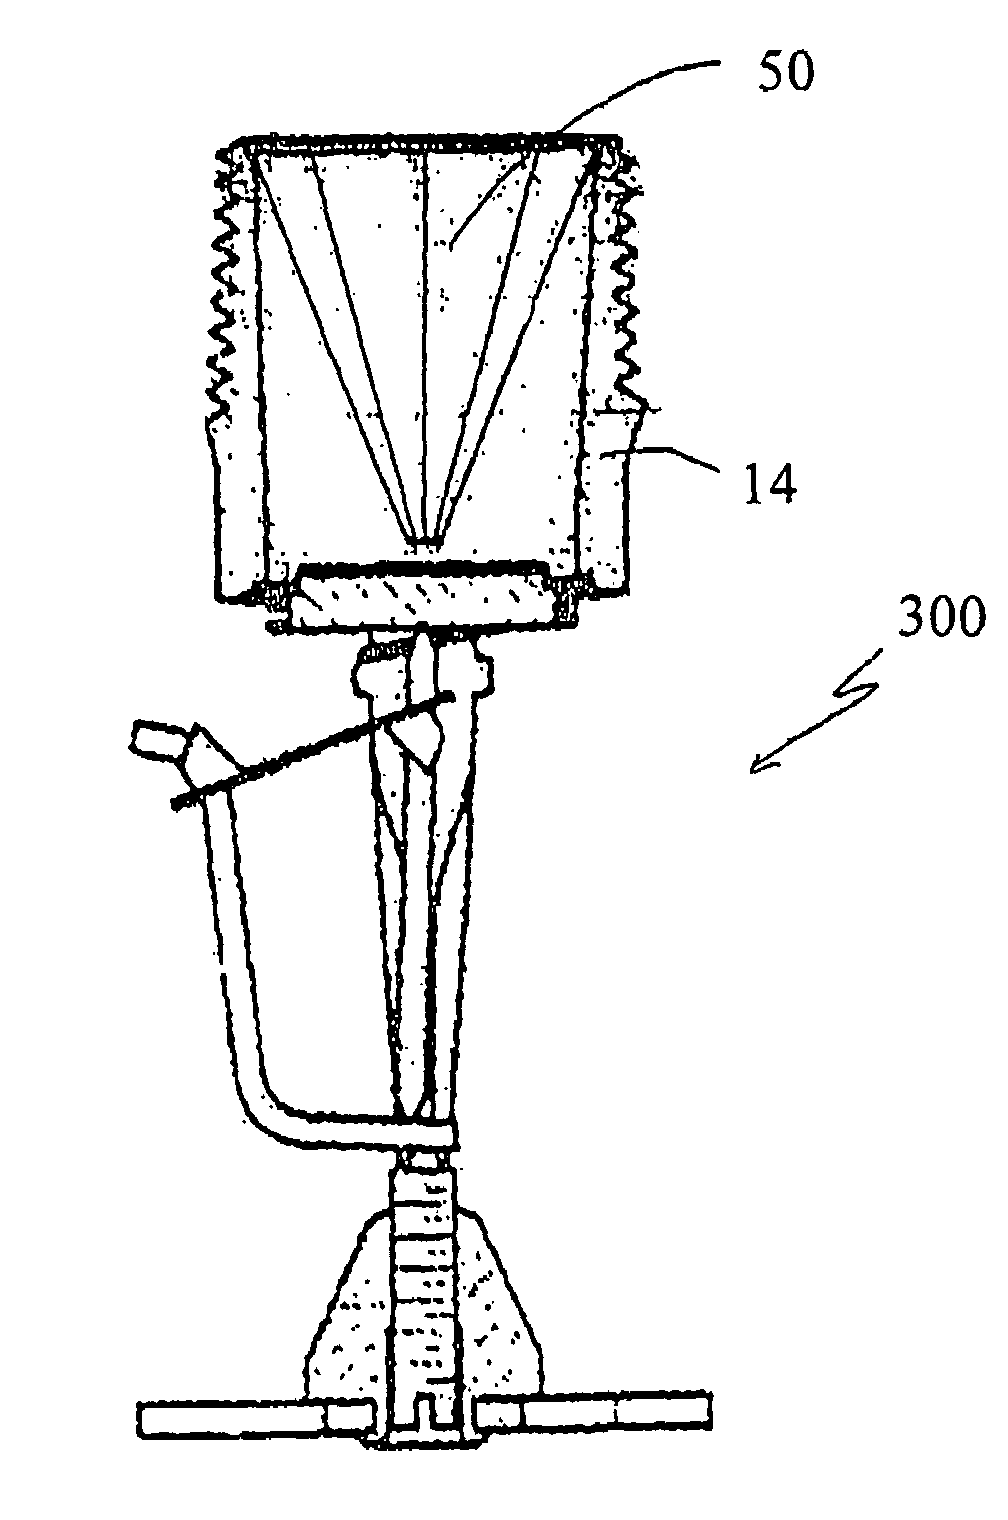 Automatic fire sprinkler having a variable orifice